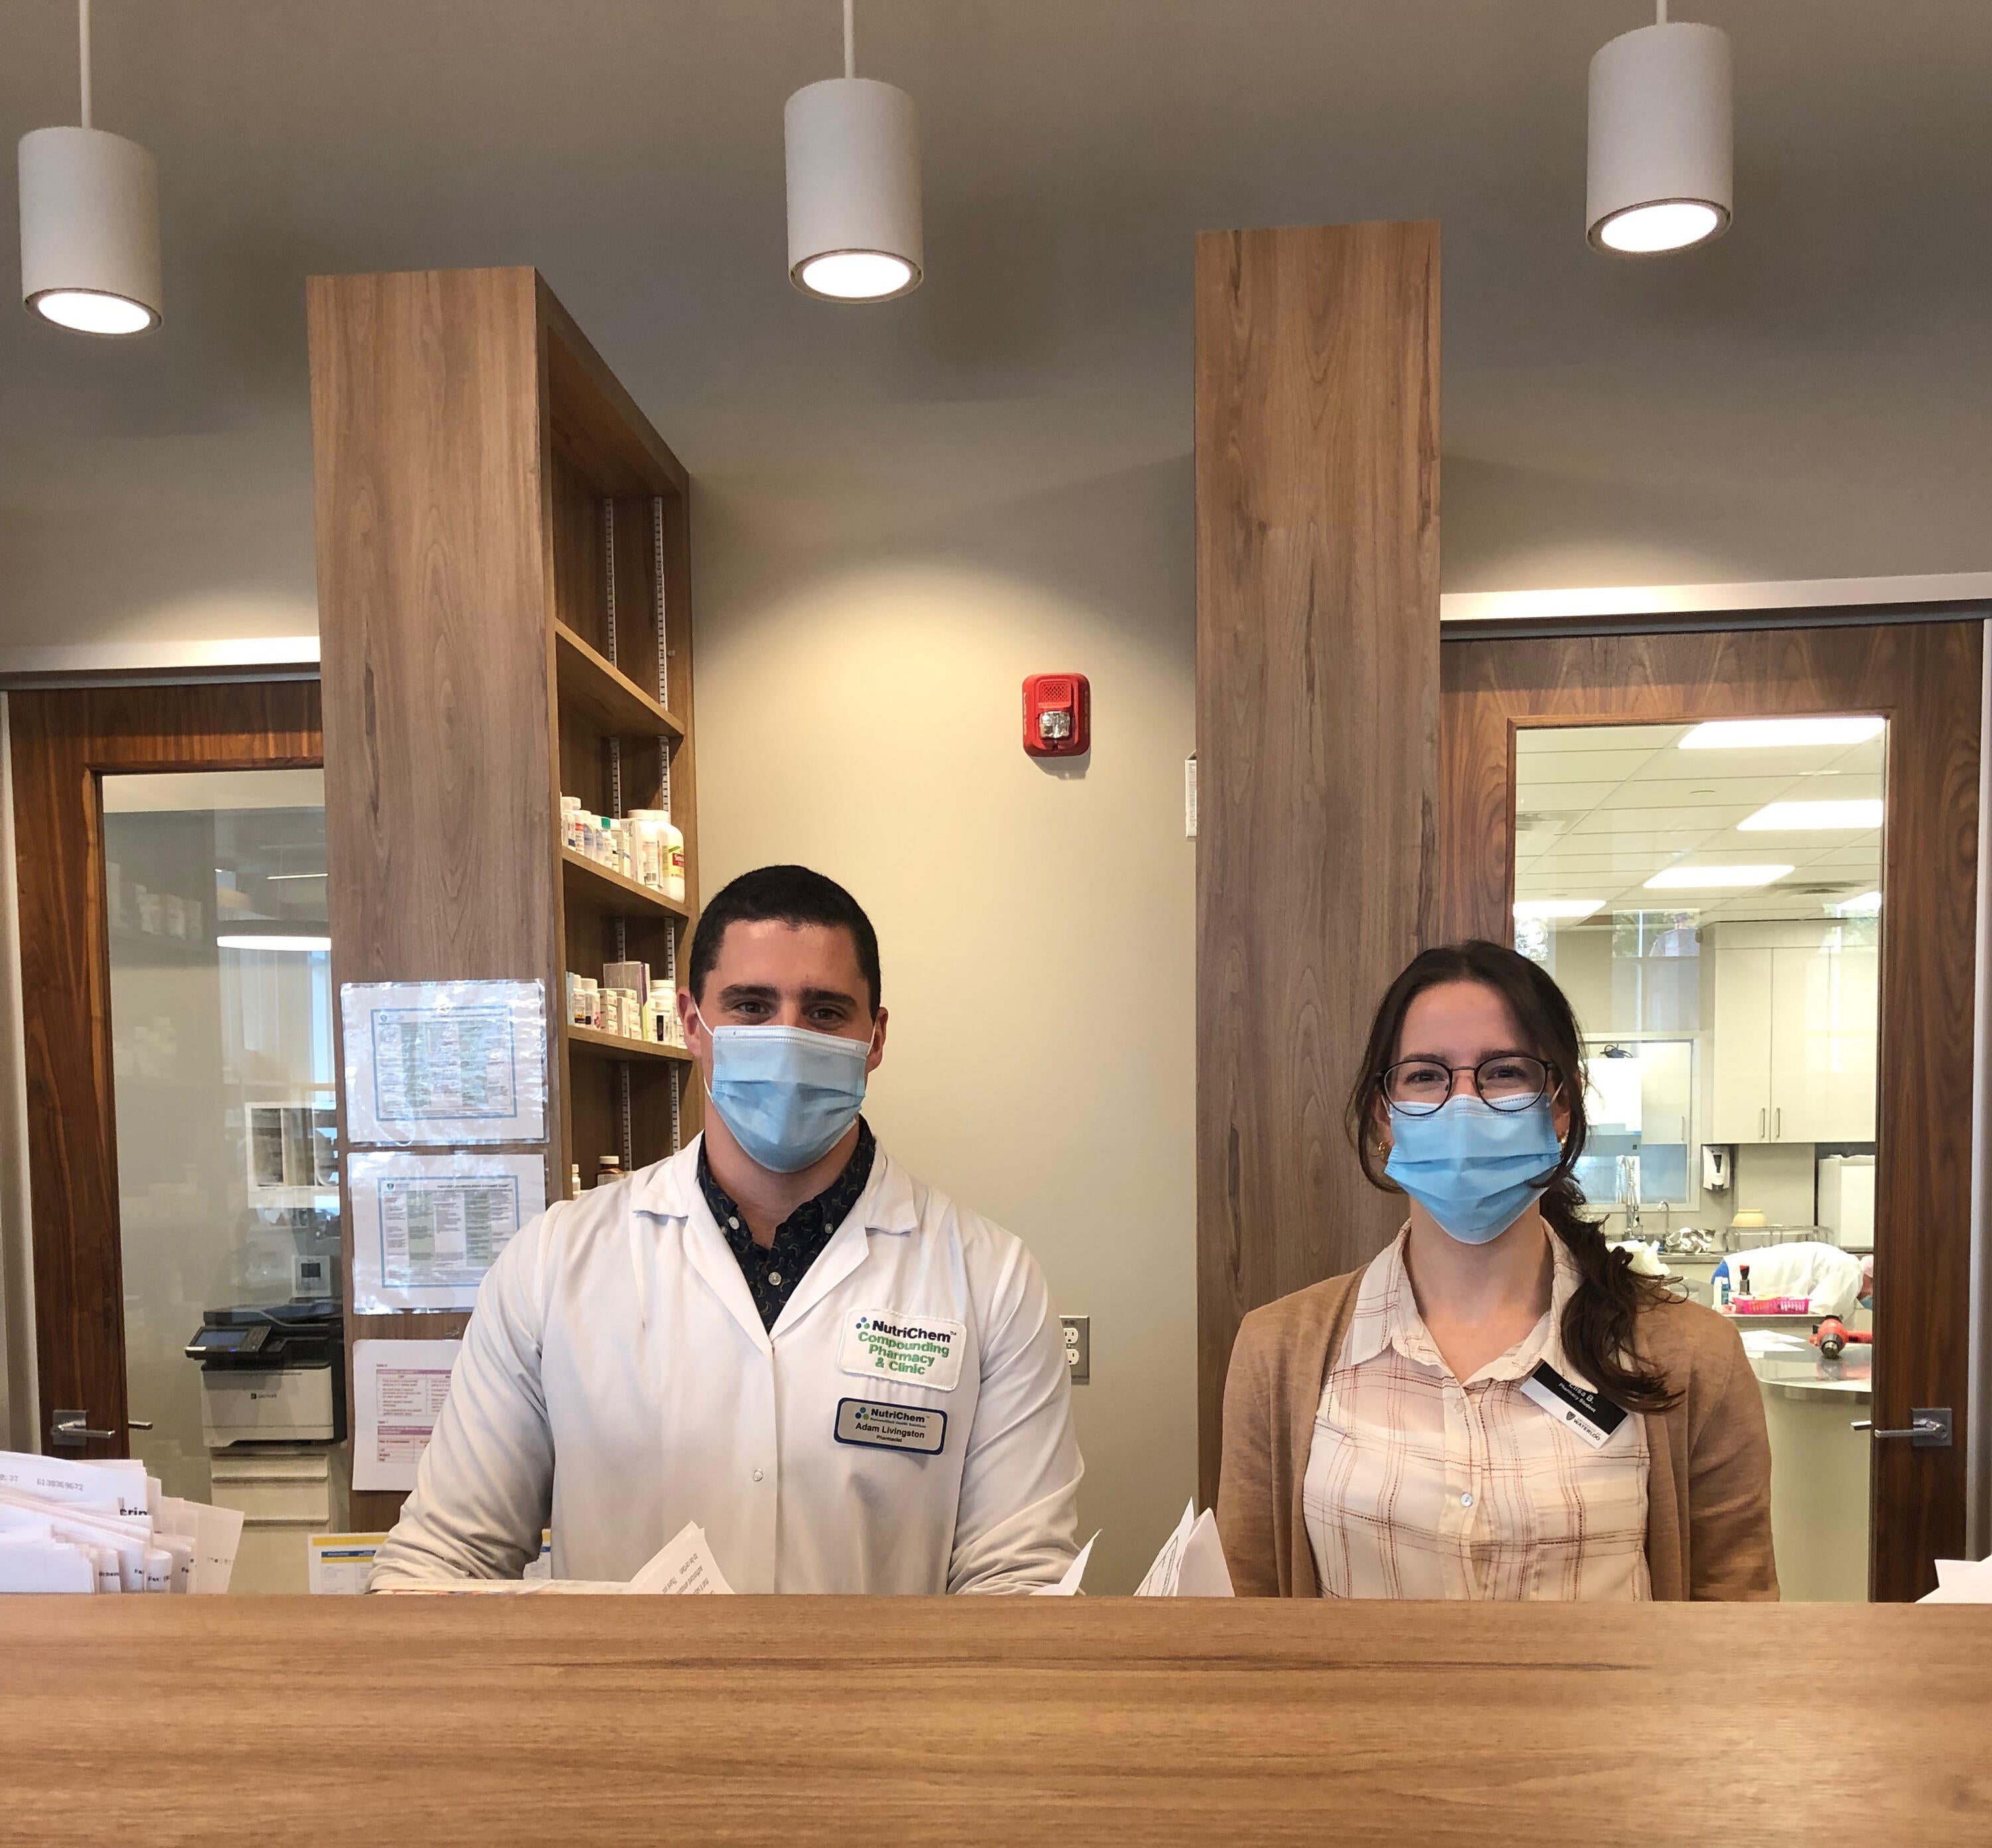 Adam and Elisa behind the dispensary wearing masks at the NutirChem Pharmacy